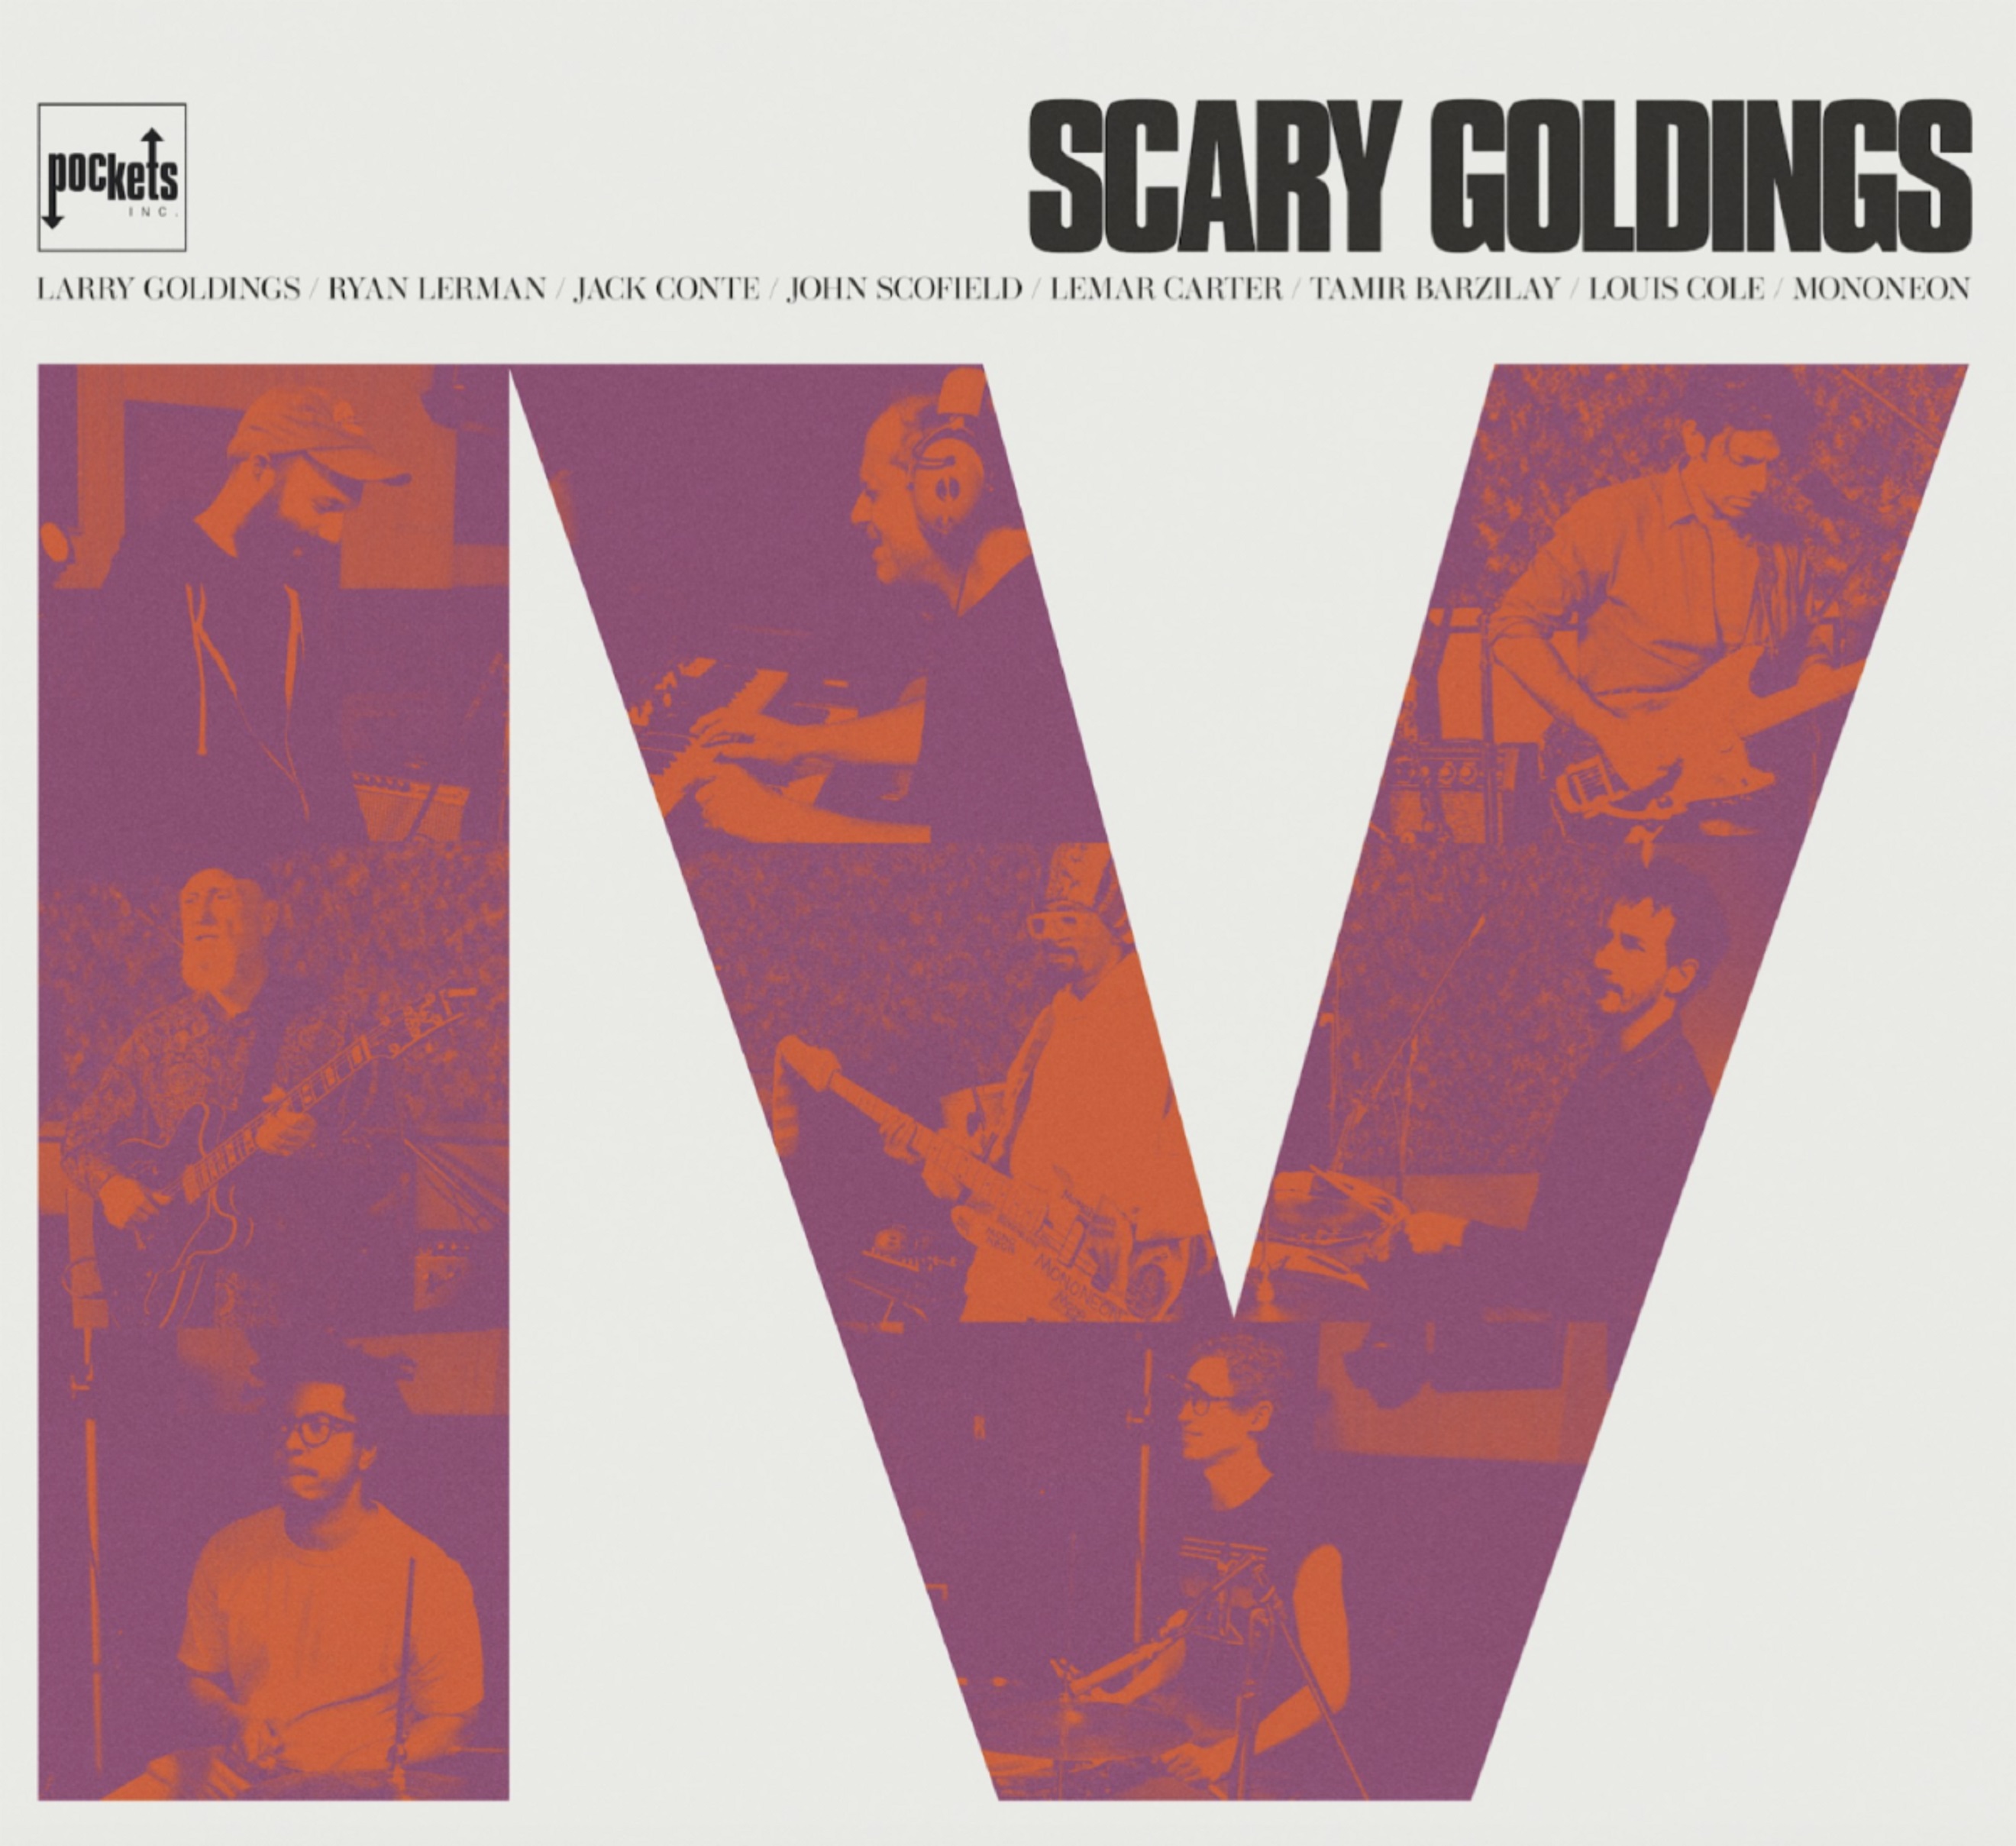 LARRY GOLDINGS MEETS JOHN SCOFIELD, MONONEON, LOUIS COLE AND THE FUNK MAESTROS OF SCARY POCKETS ON SCARY GOLDINGS IV